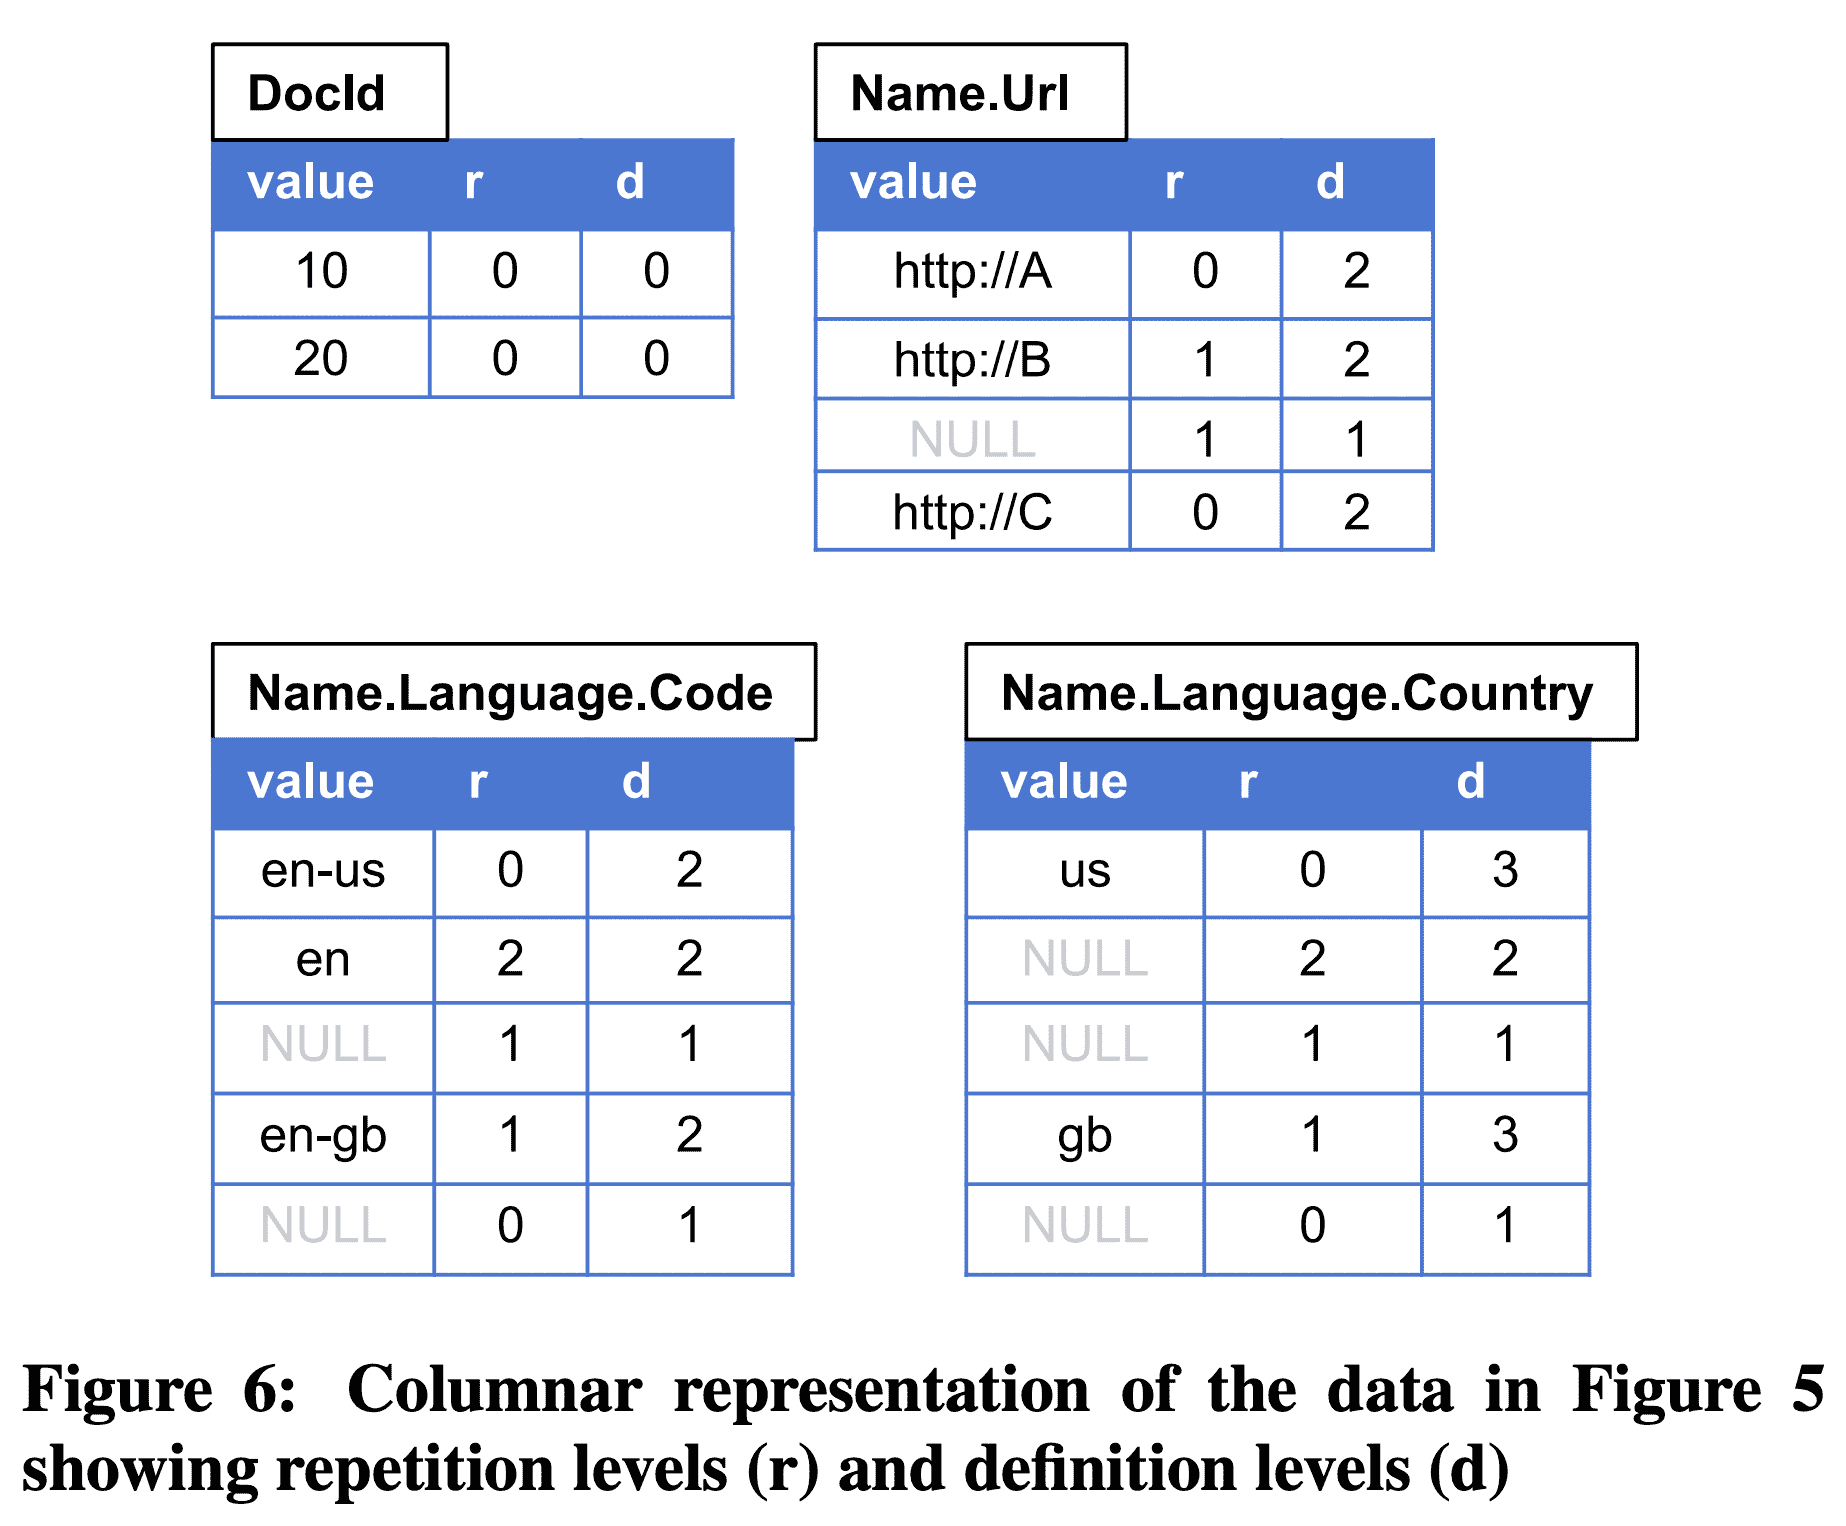 Columnar representation of the data in Figure 5 showing repetition levels (r) and definition levels (d)